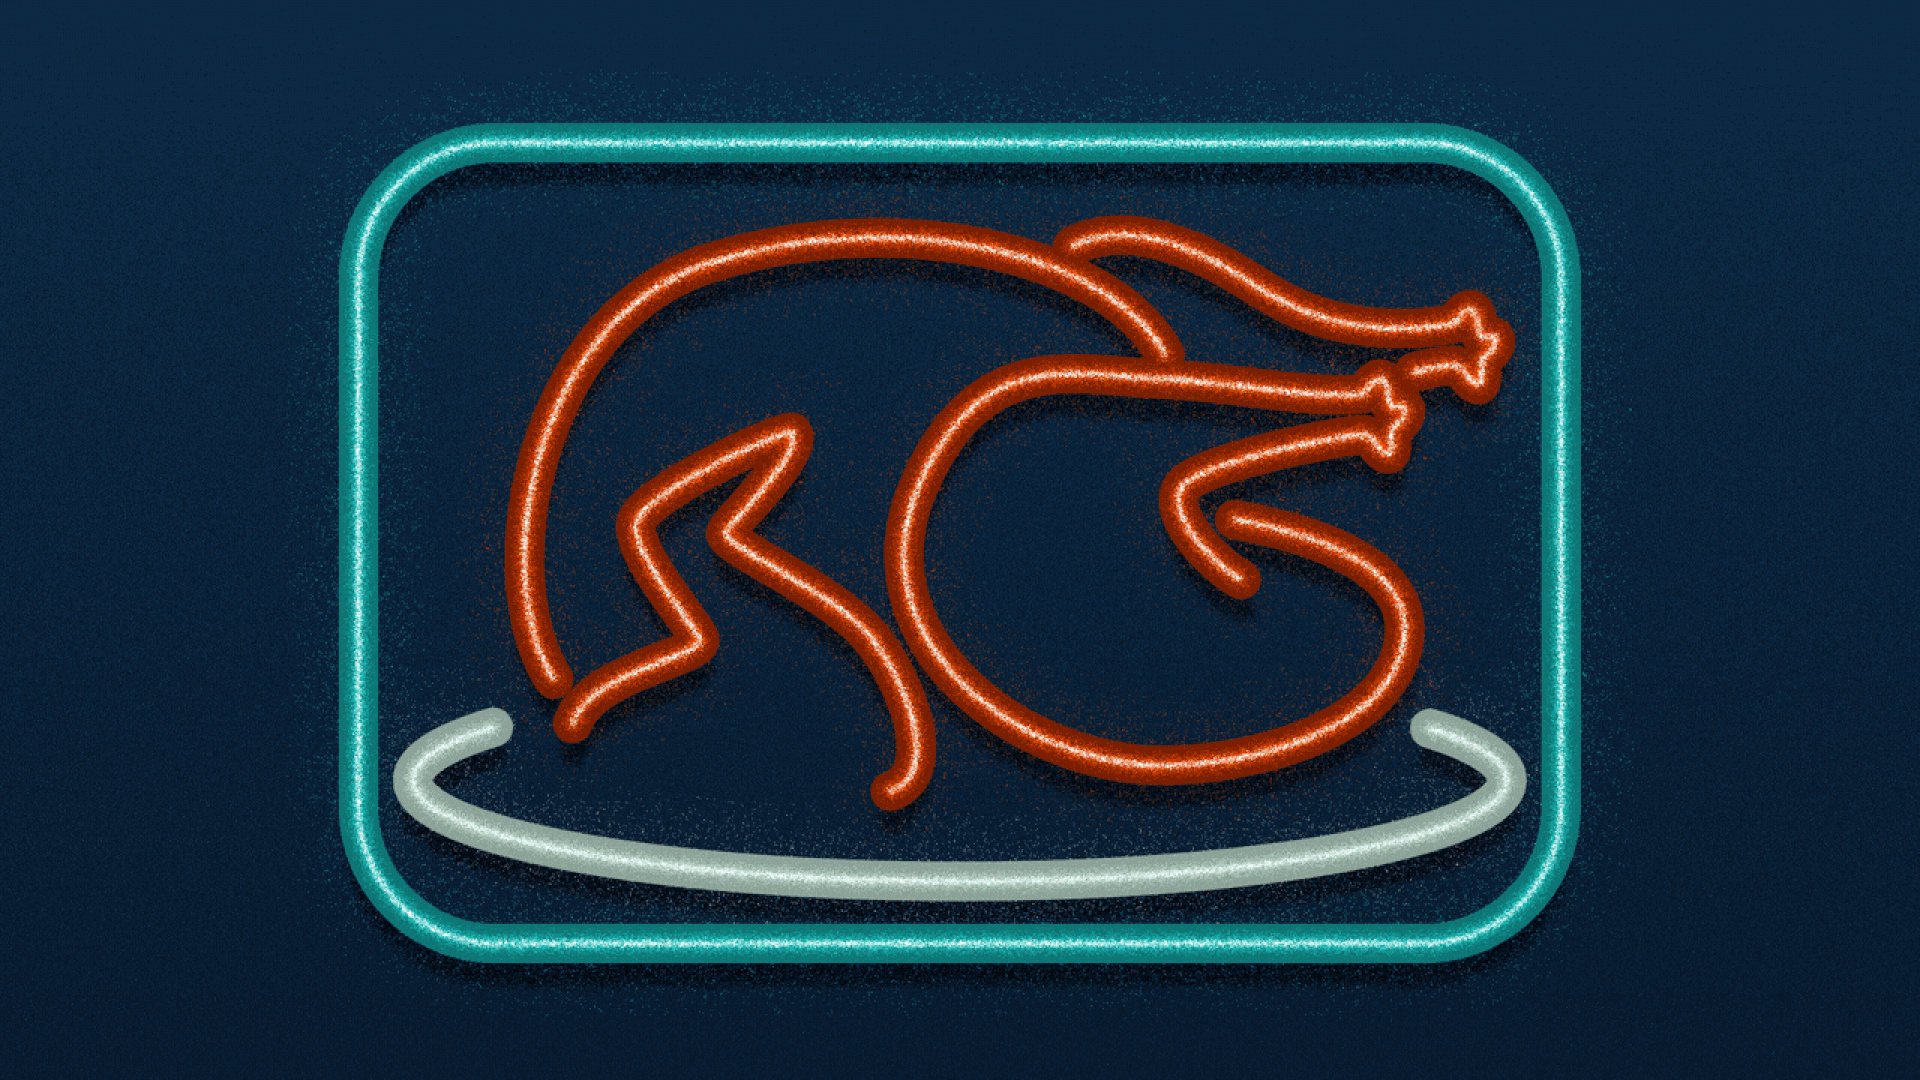 Illustration of a neon sign in which a turkey lights up and flickers.